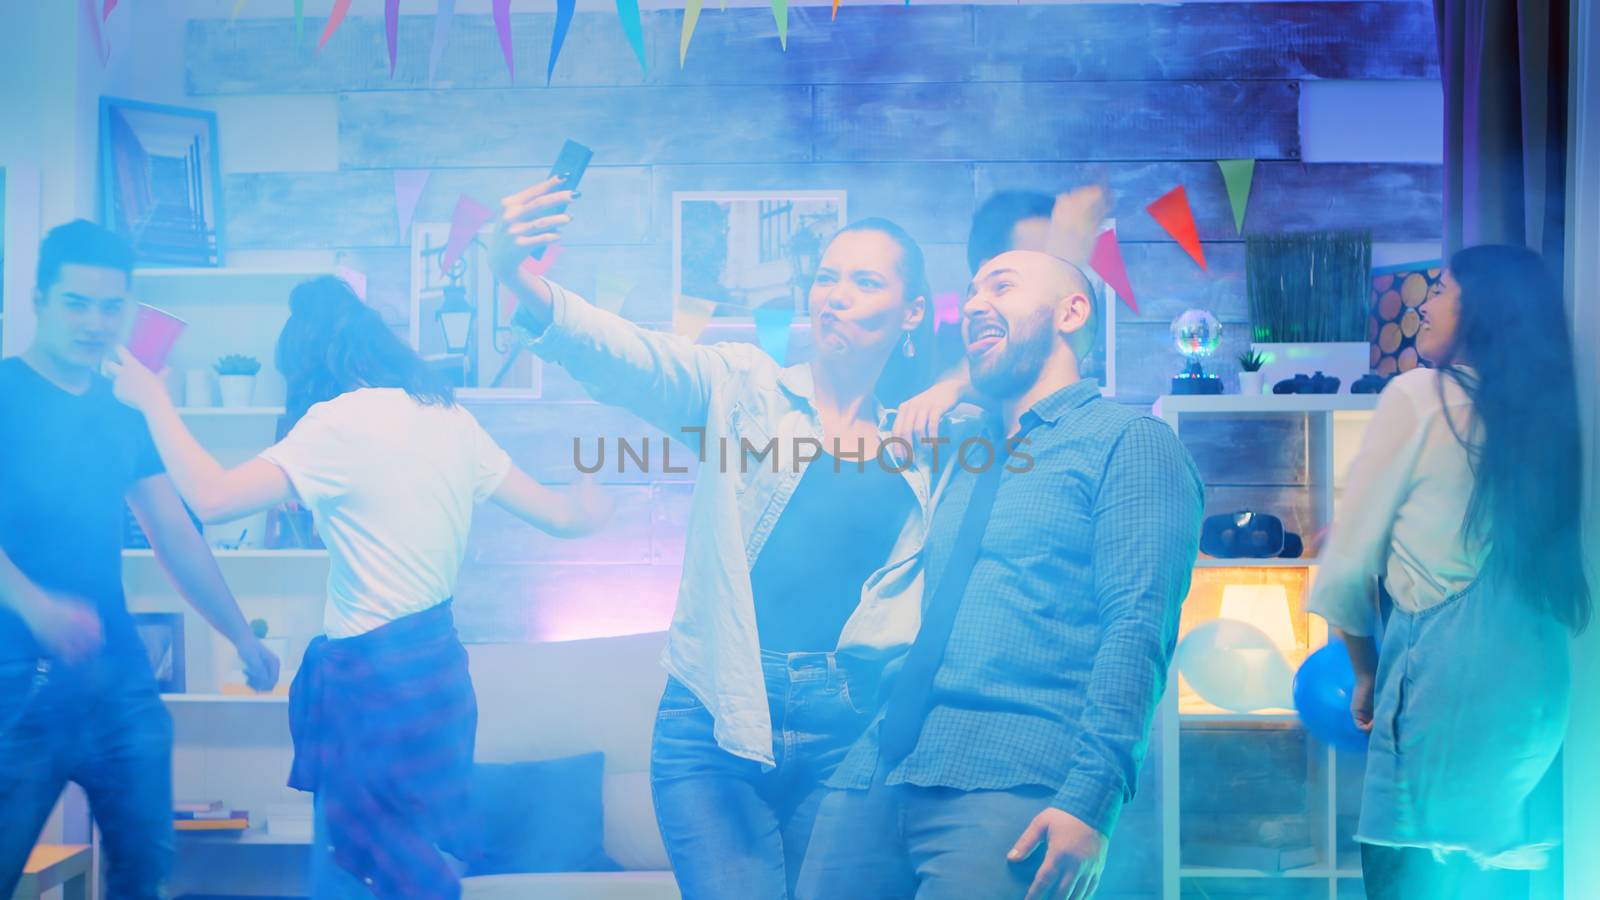 Young man and woman making funny faces while taking selfies at a party with neon lights and smoke.